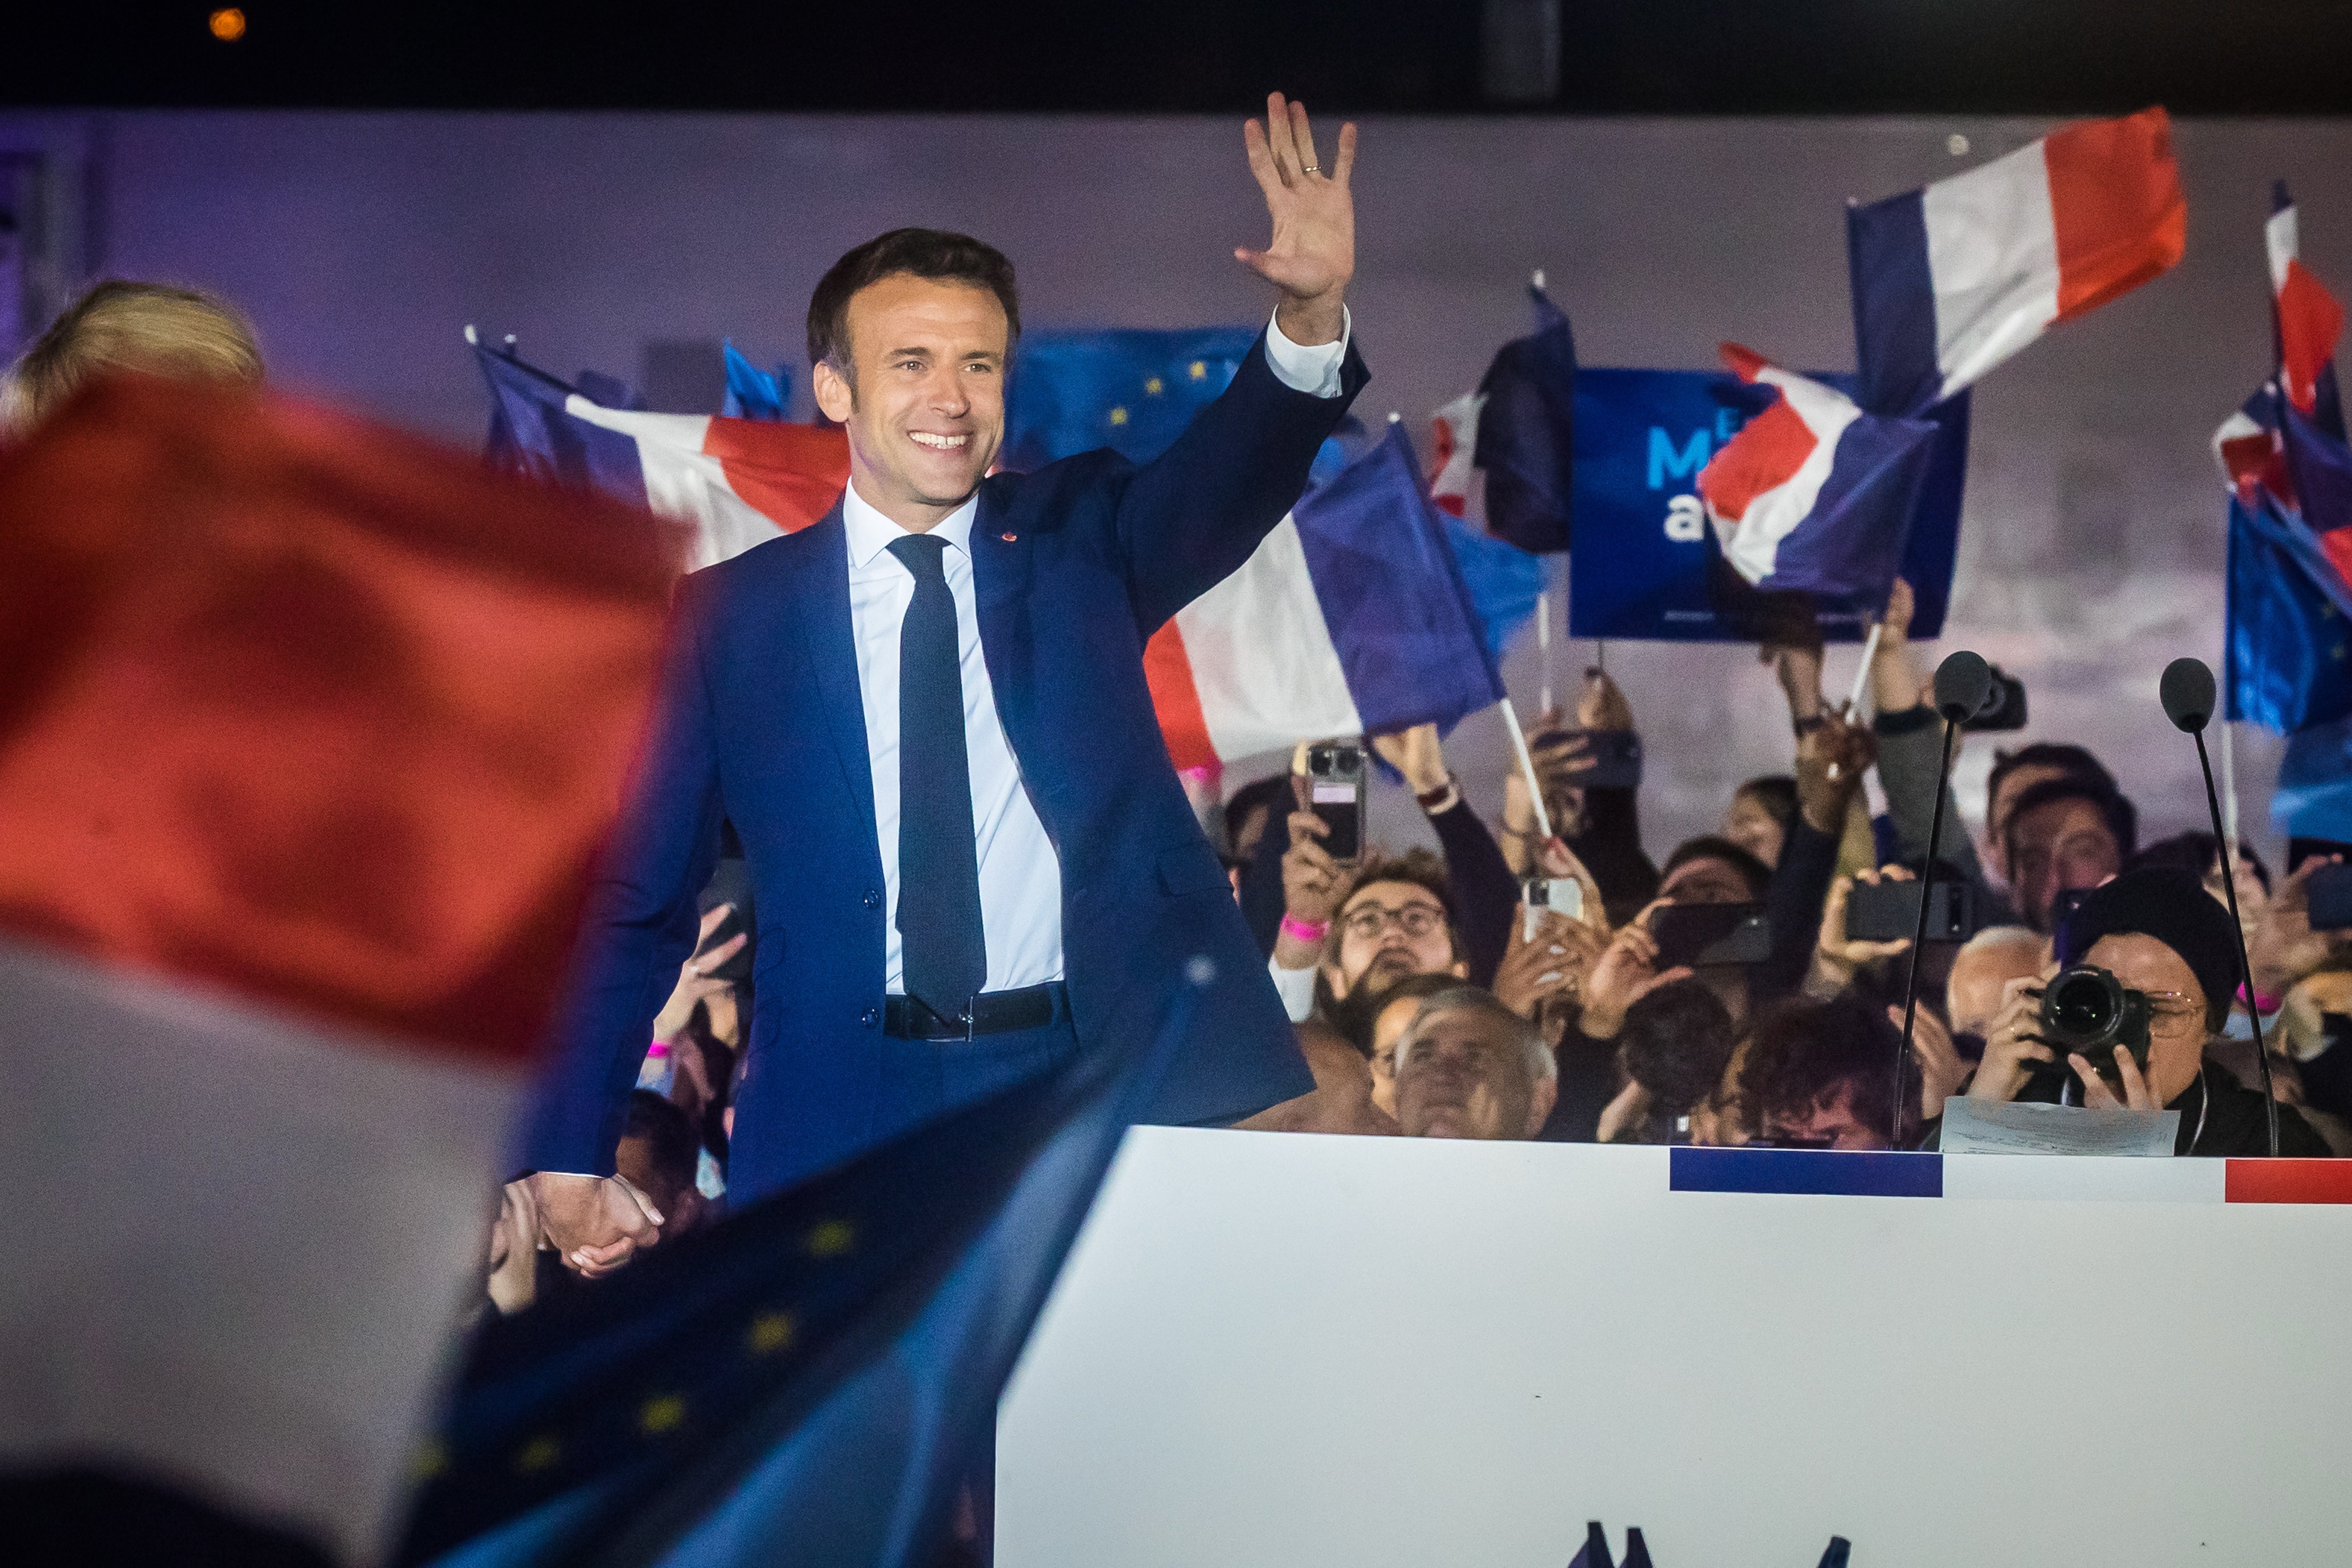 Macron proceeded to his victory rally to the strains of the European anthem